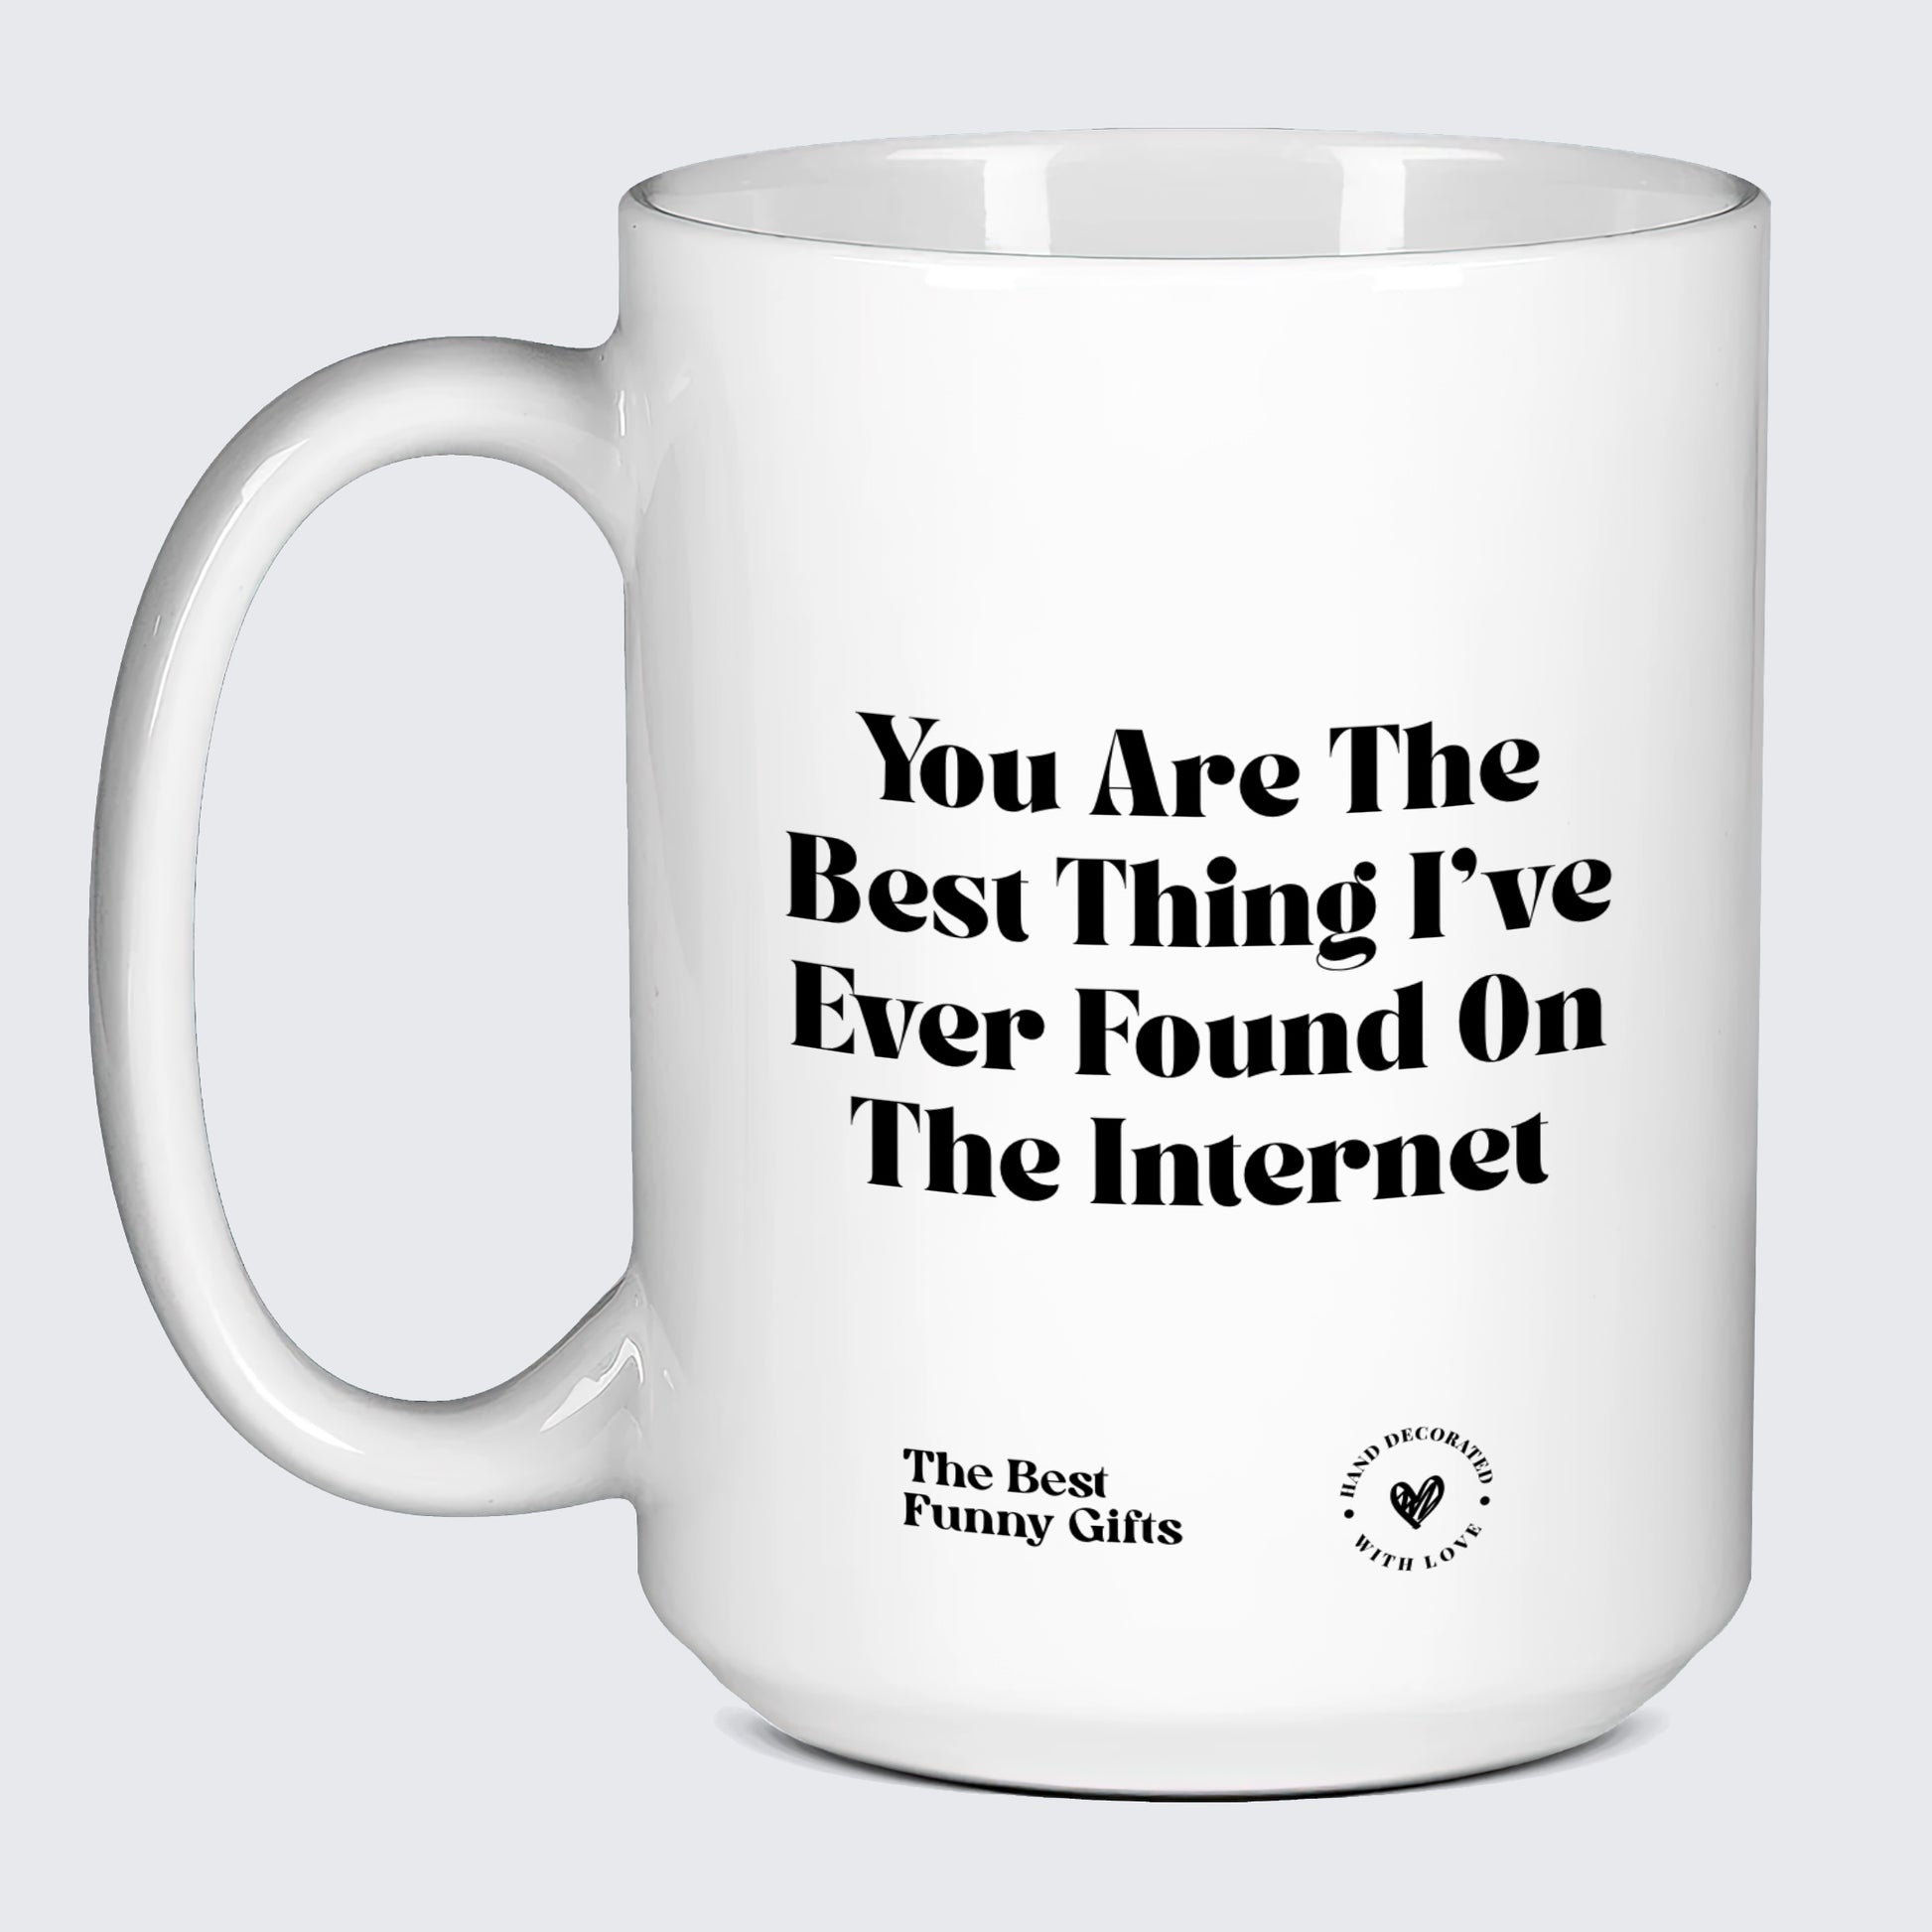 Anniversary Gift You Are the Best Thing I've Ever Found on the Internet - The Best Funny Gifts